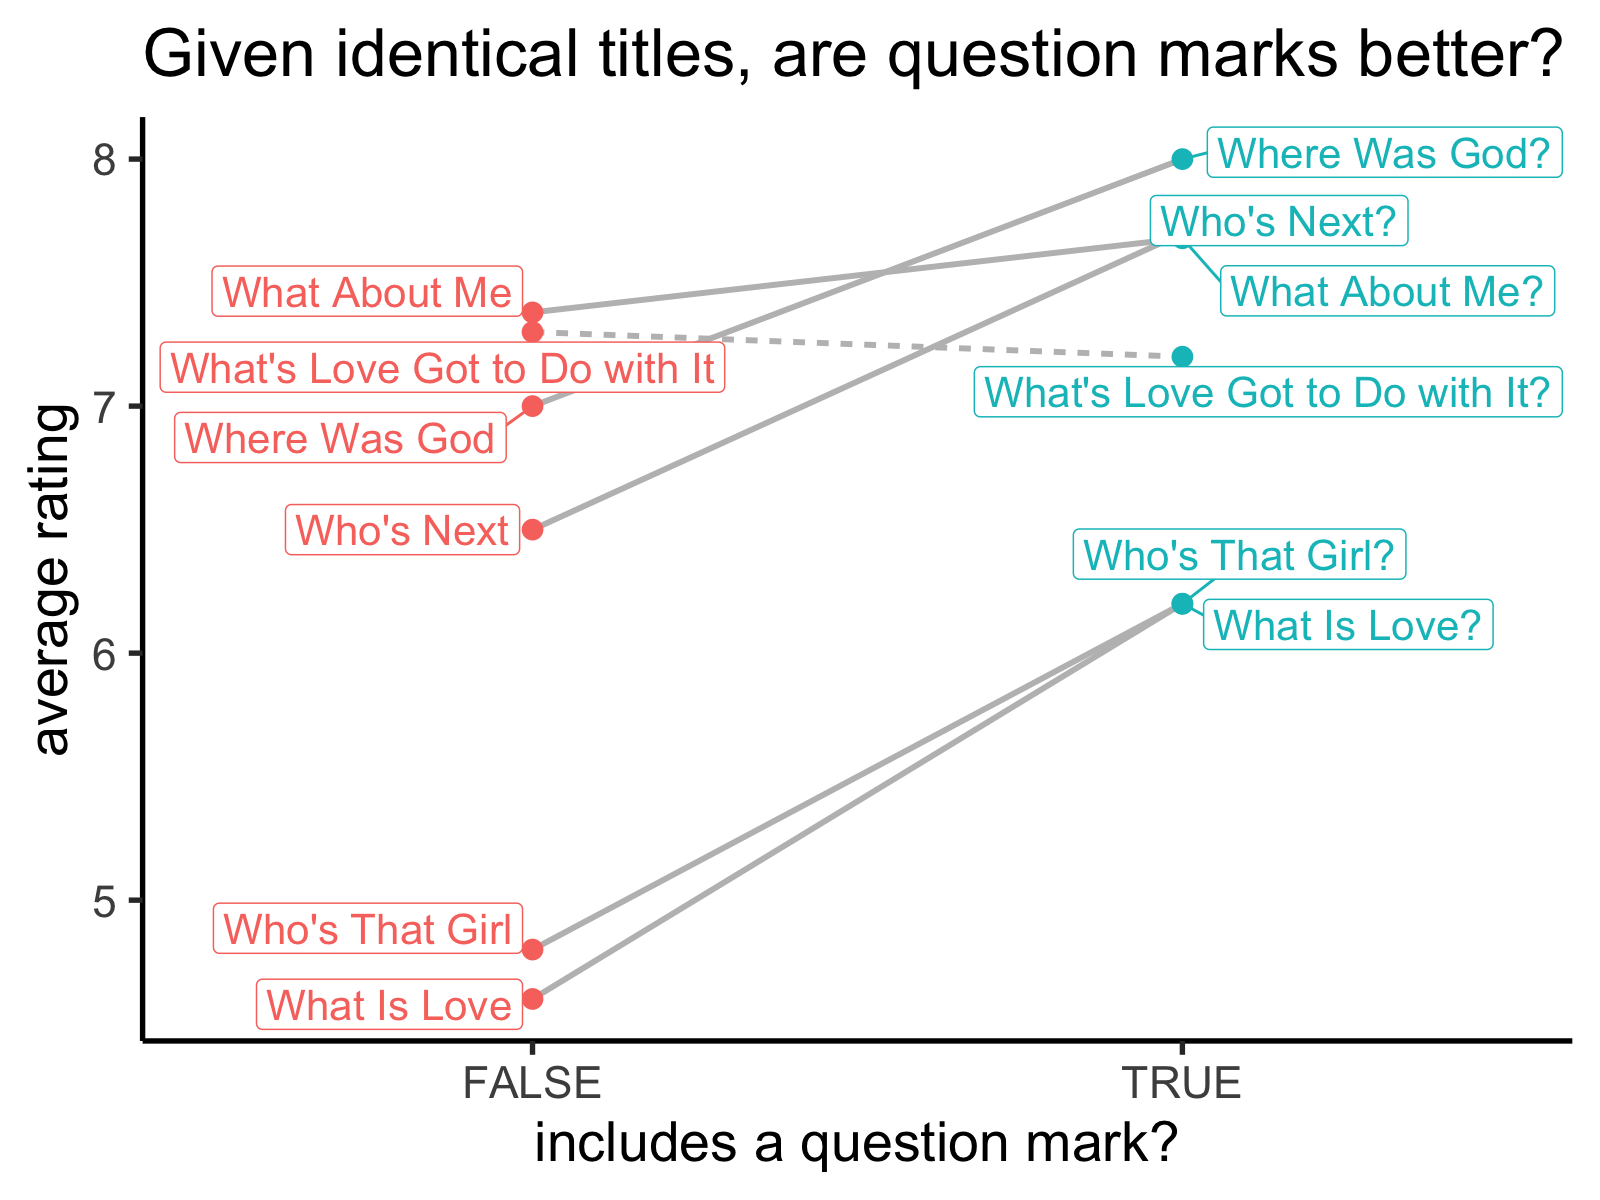 When we compare paired movie titles, the counterparts with question marks get better ratings! (Except for the one pair marked by a dashed line.)